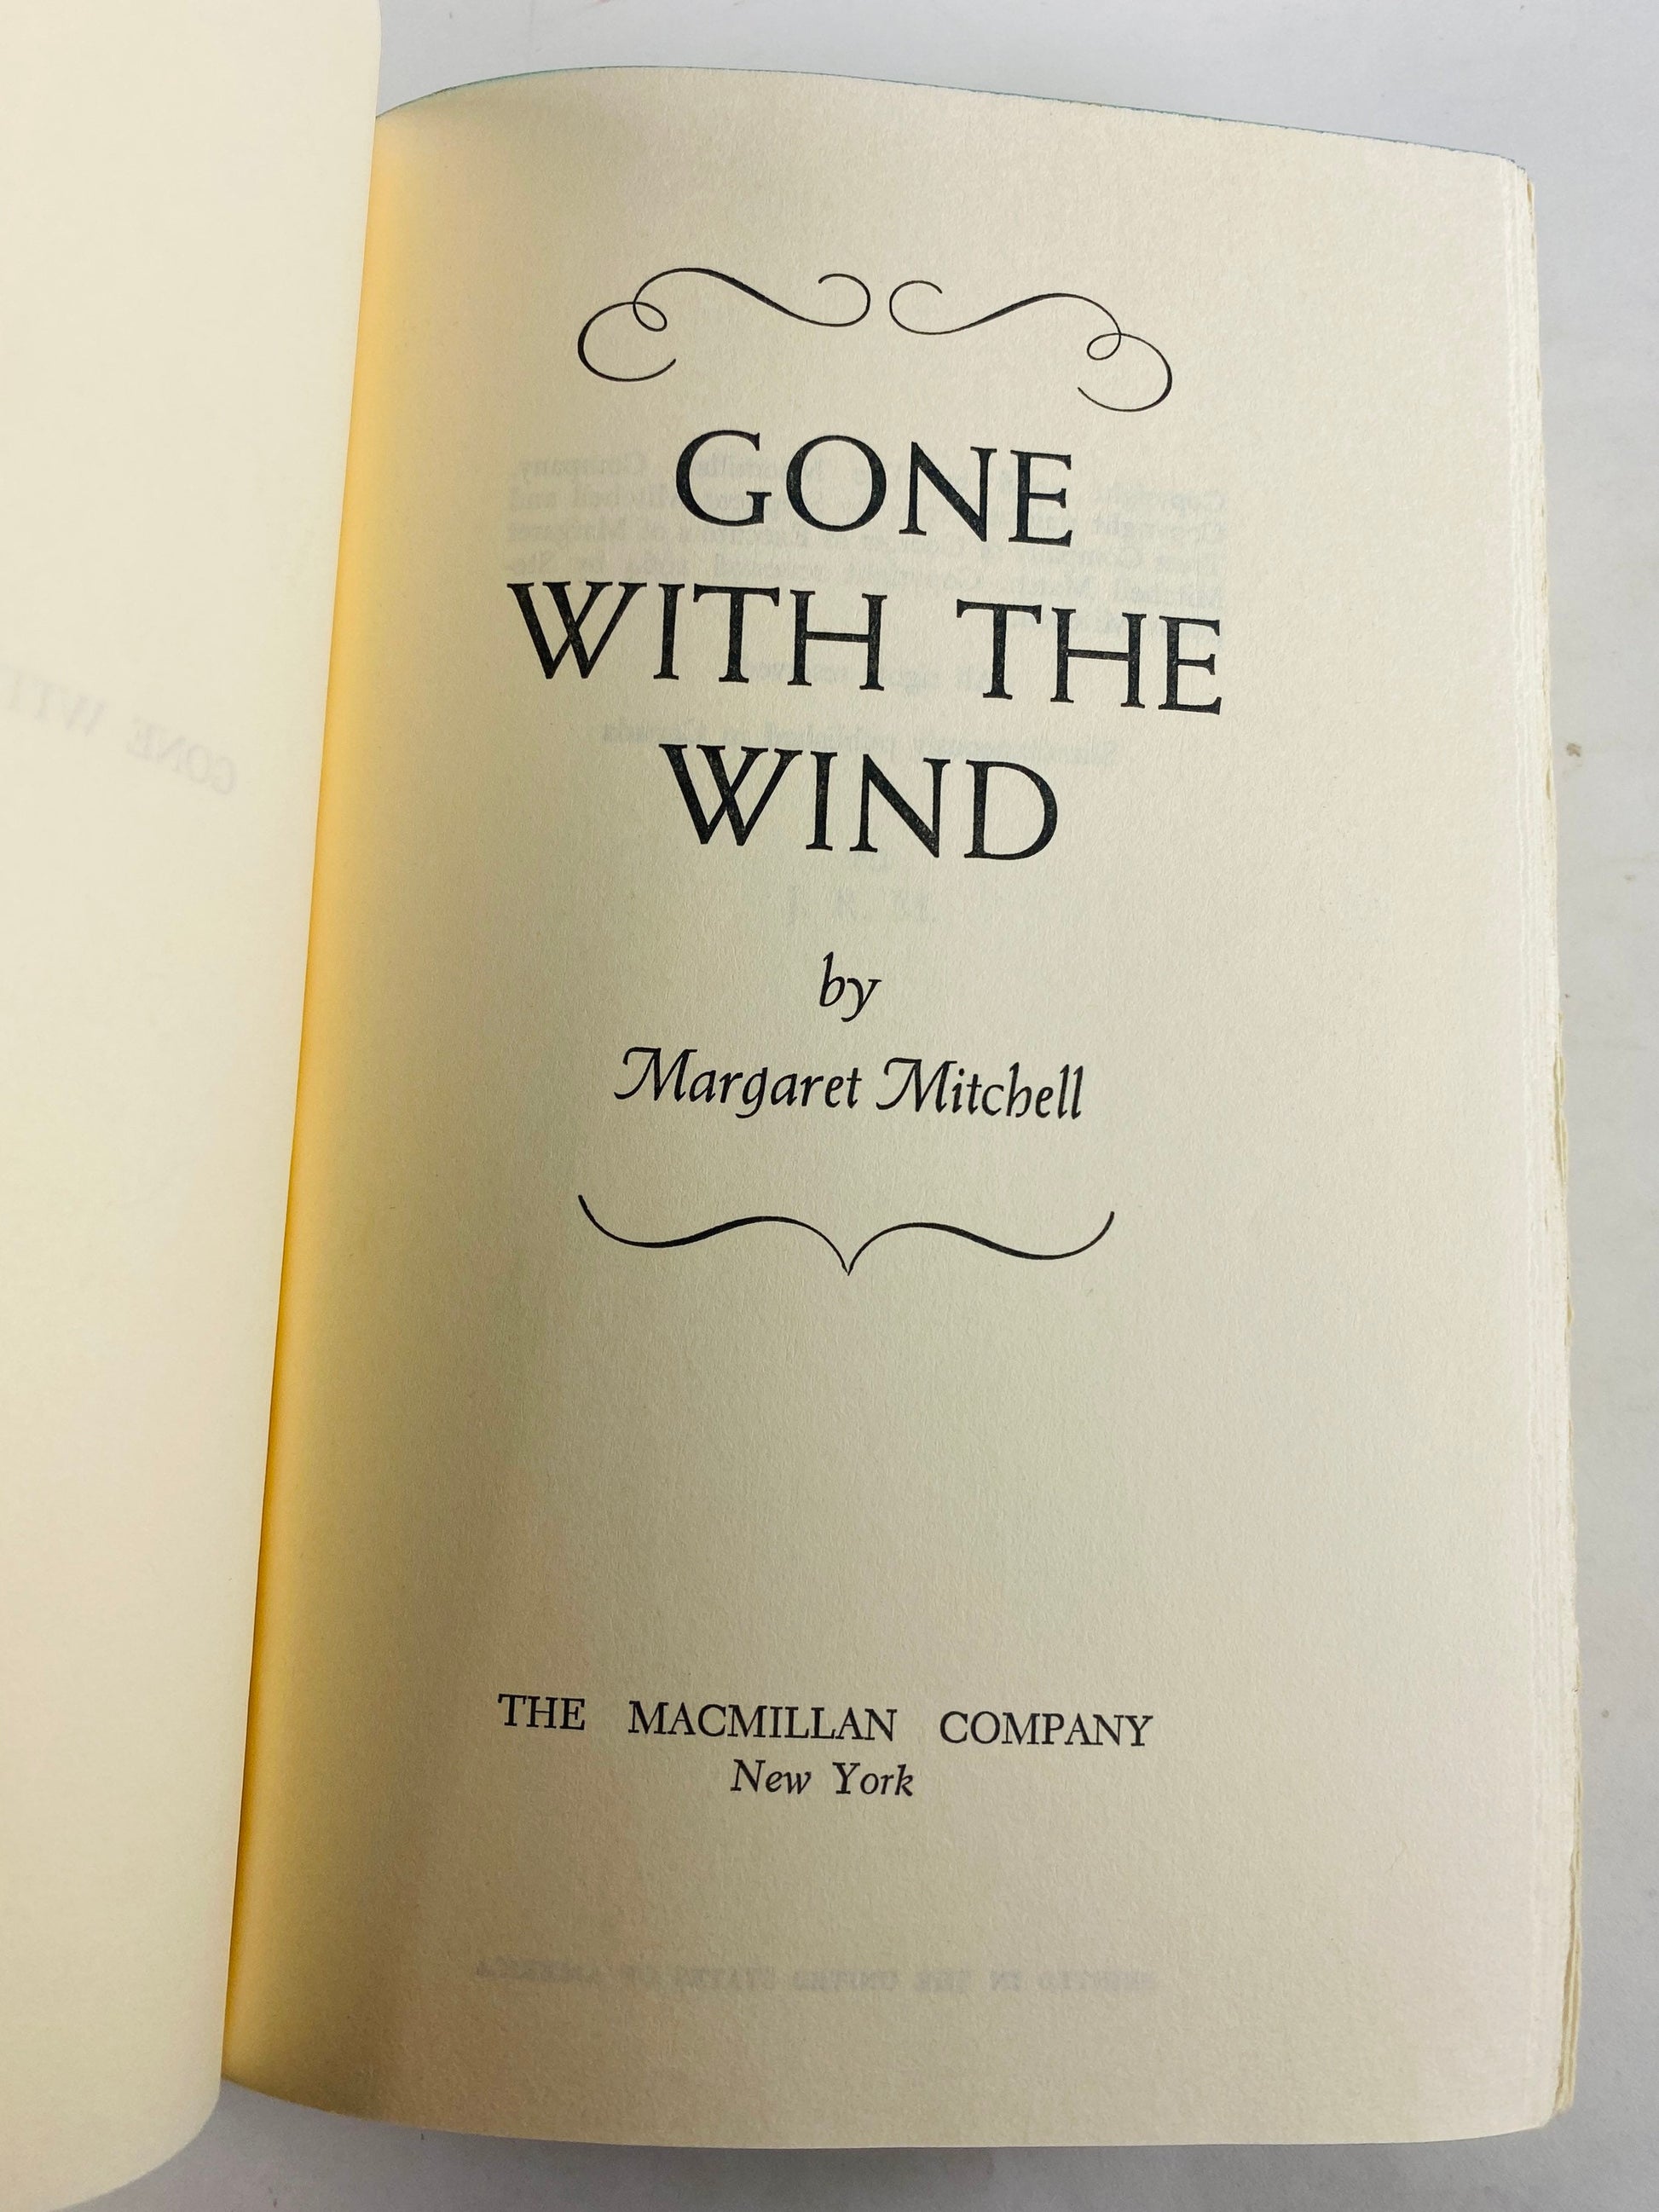 1936 Gone with the Wind by Margaret Mitchell. Vintage book EARLY PRINTING. Epic historical romance Scarlett O'hara. Blue home decor